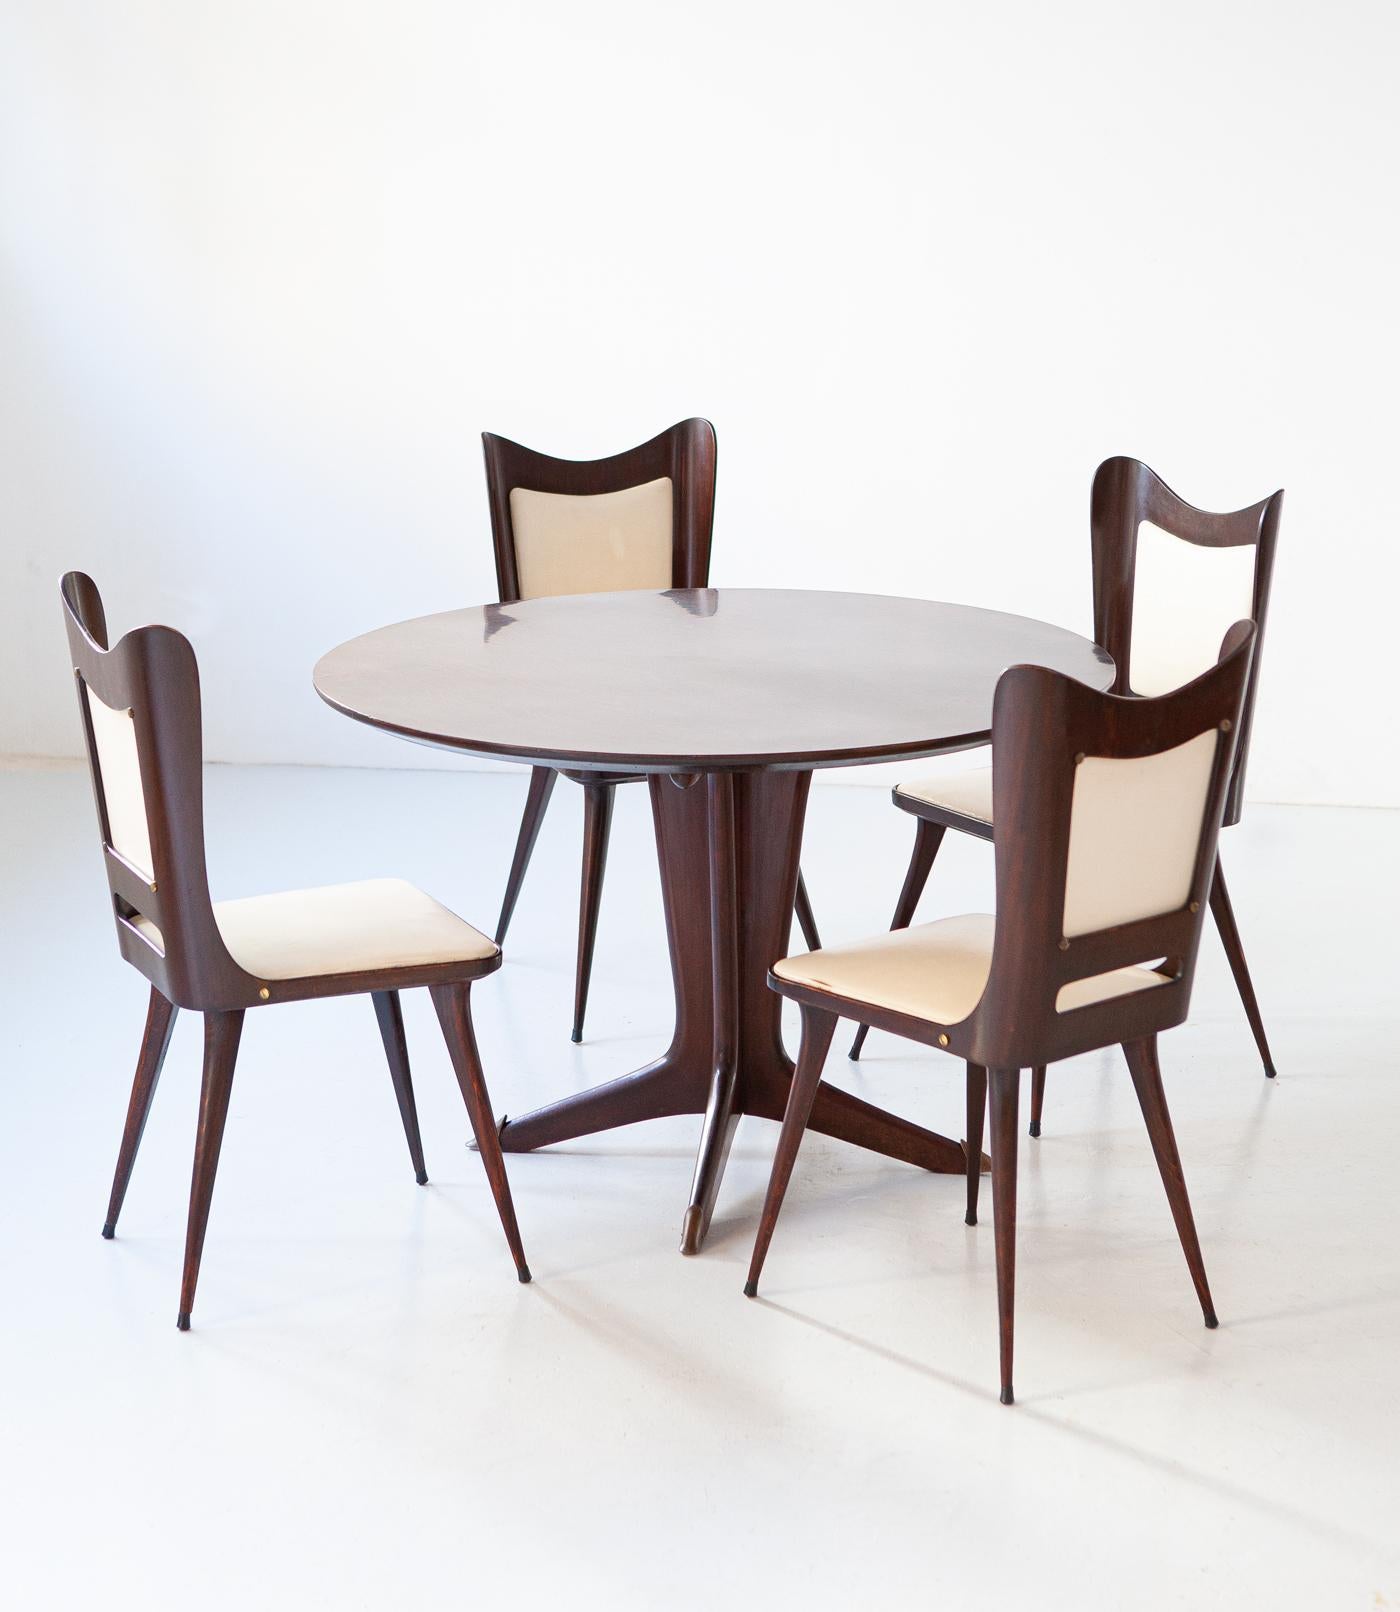 Italian Round Wooden Dining Table with 4 Chairs Set by Carlo Ratti 3